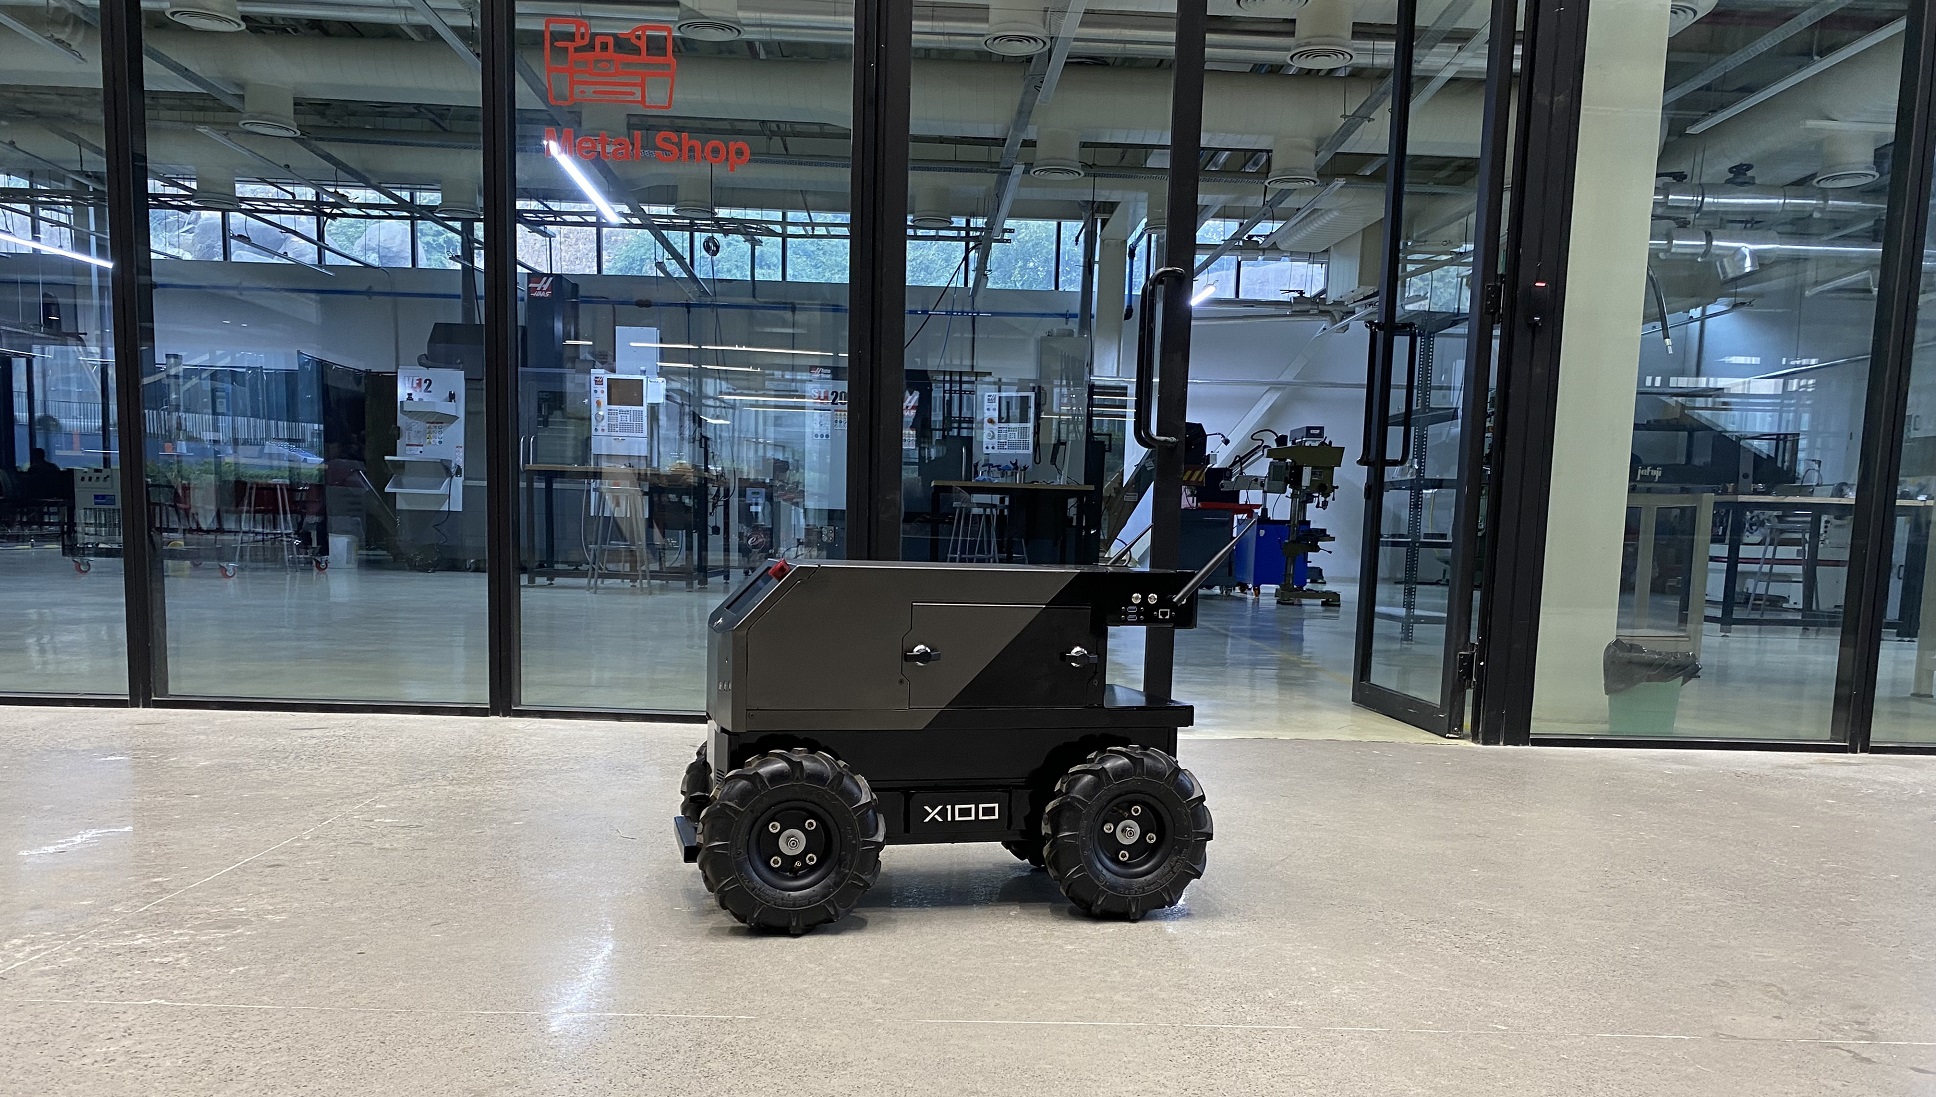 RR100 mobile research robot - ROS compatible (UGV)